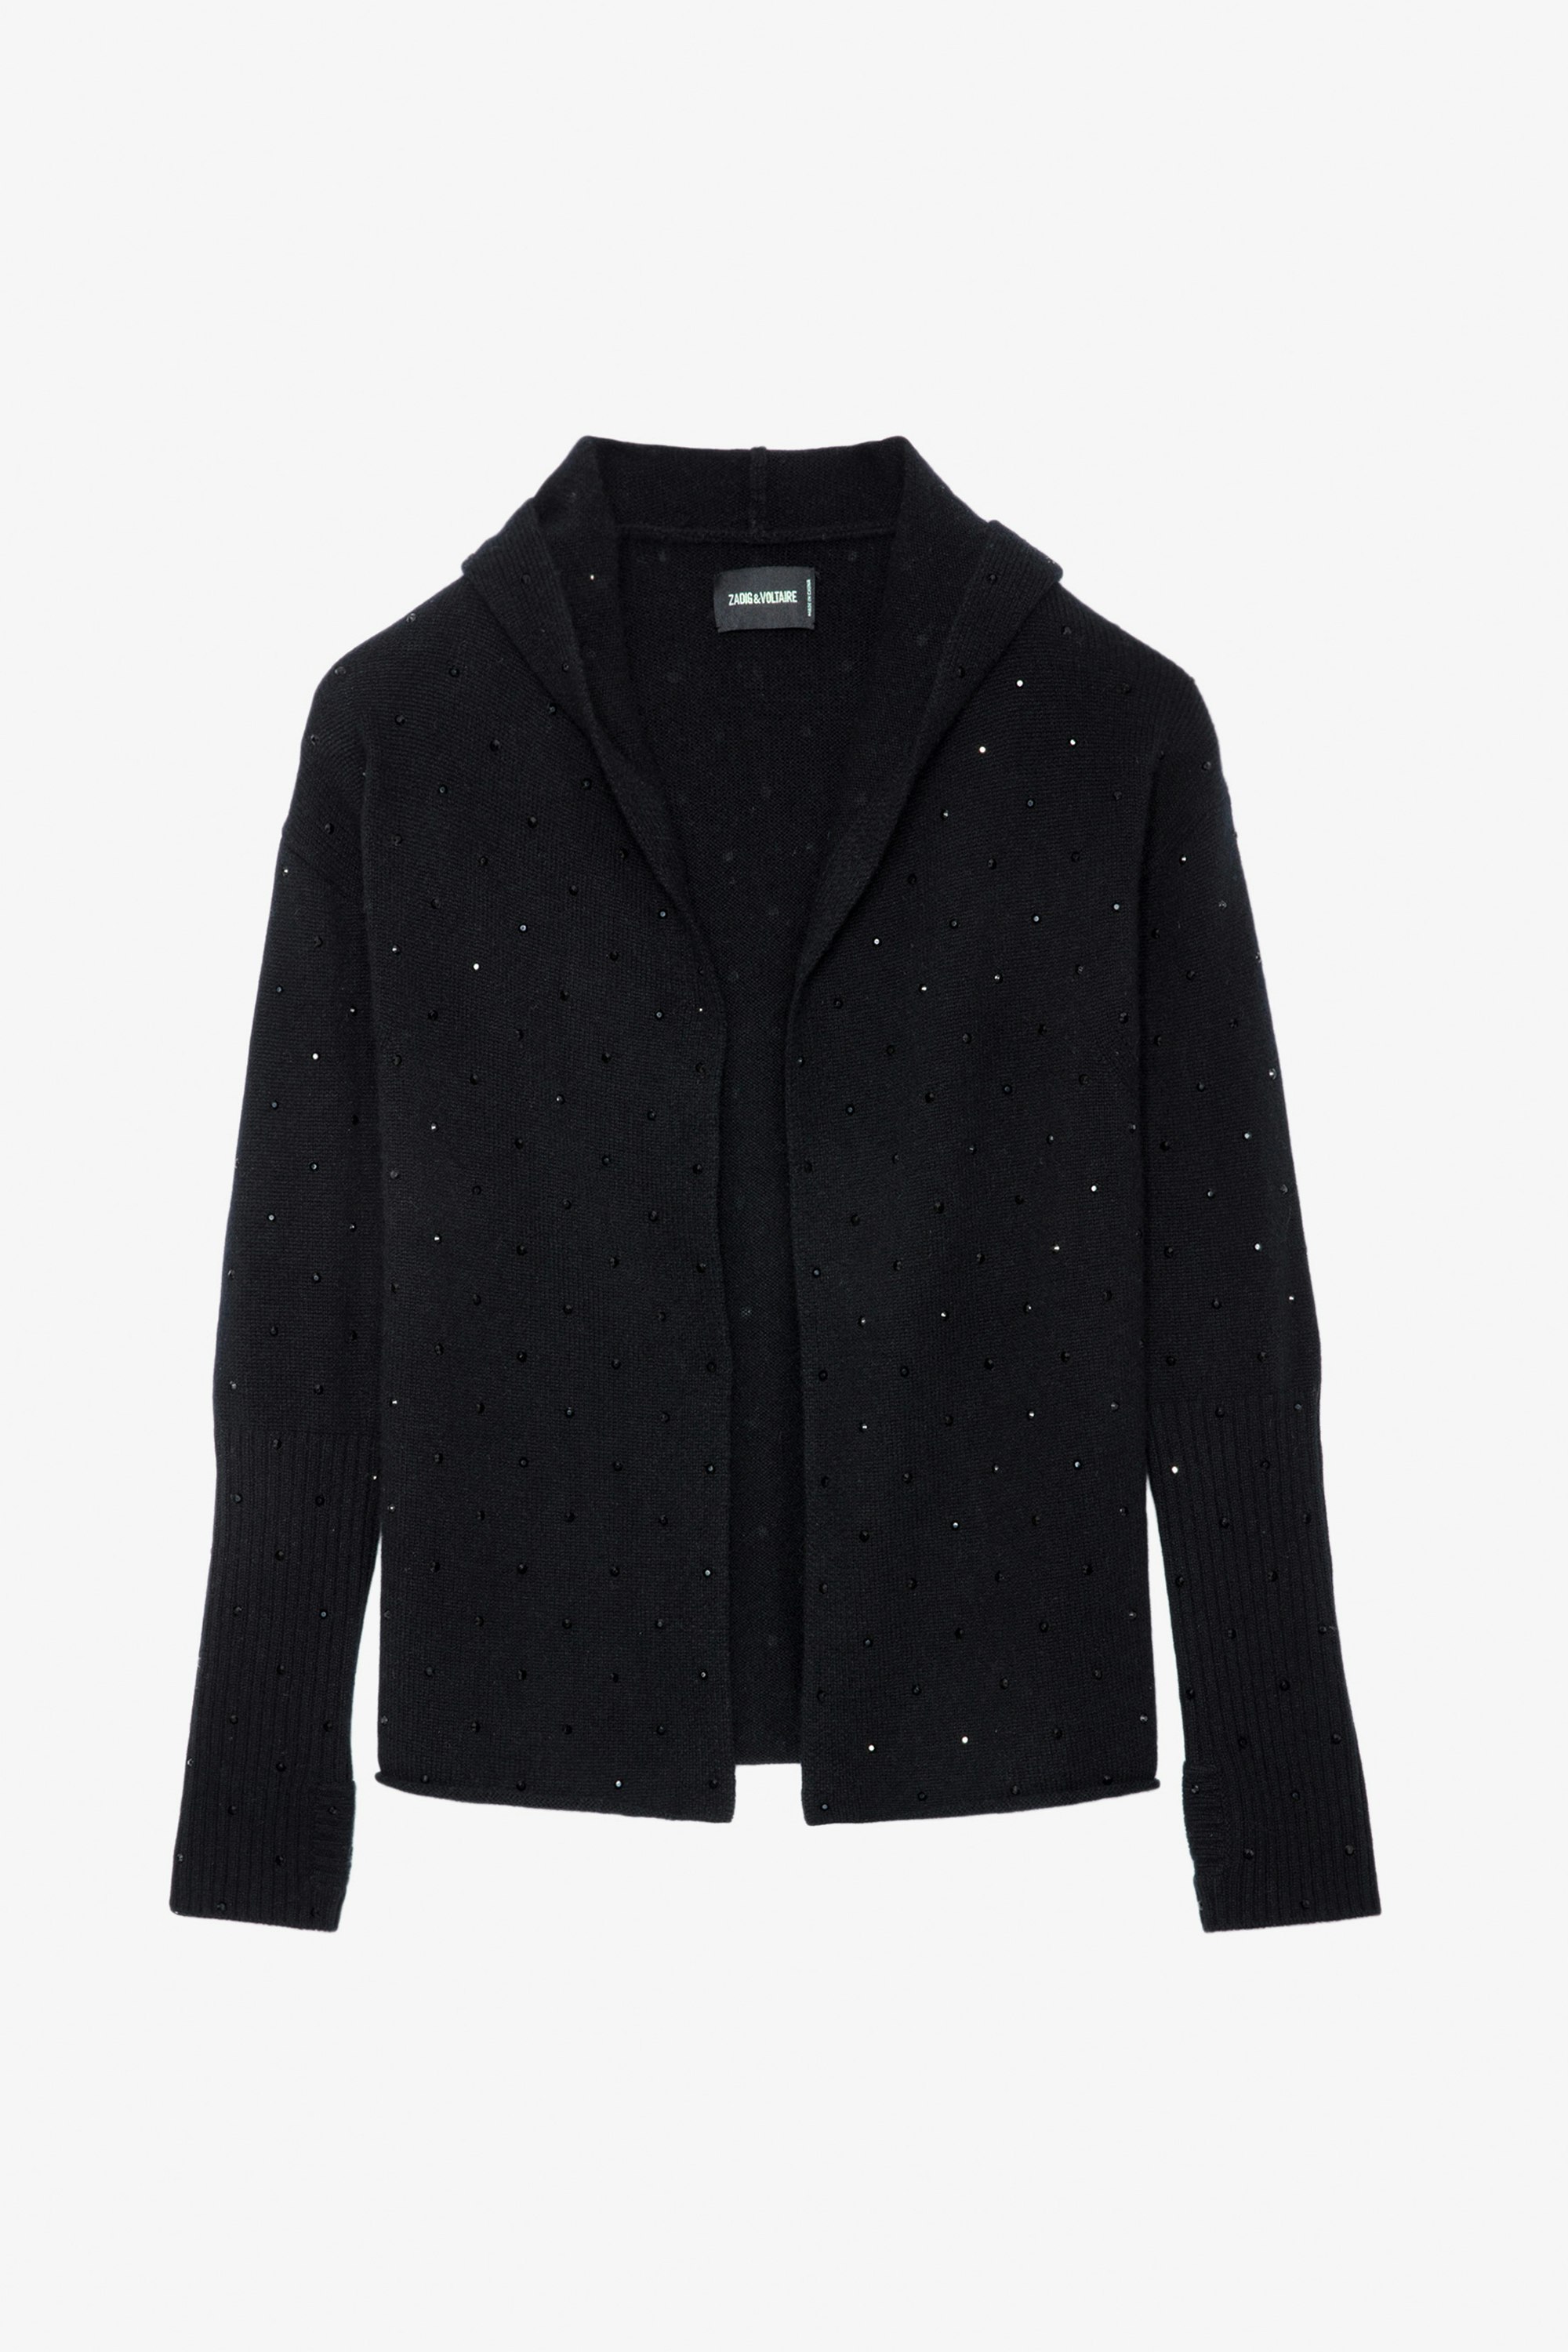 Cosany Diamanté Cashmere Cardigan - Black cashmere hooded cardigan with long diamanté-embellished sleeves.